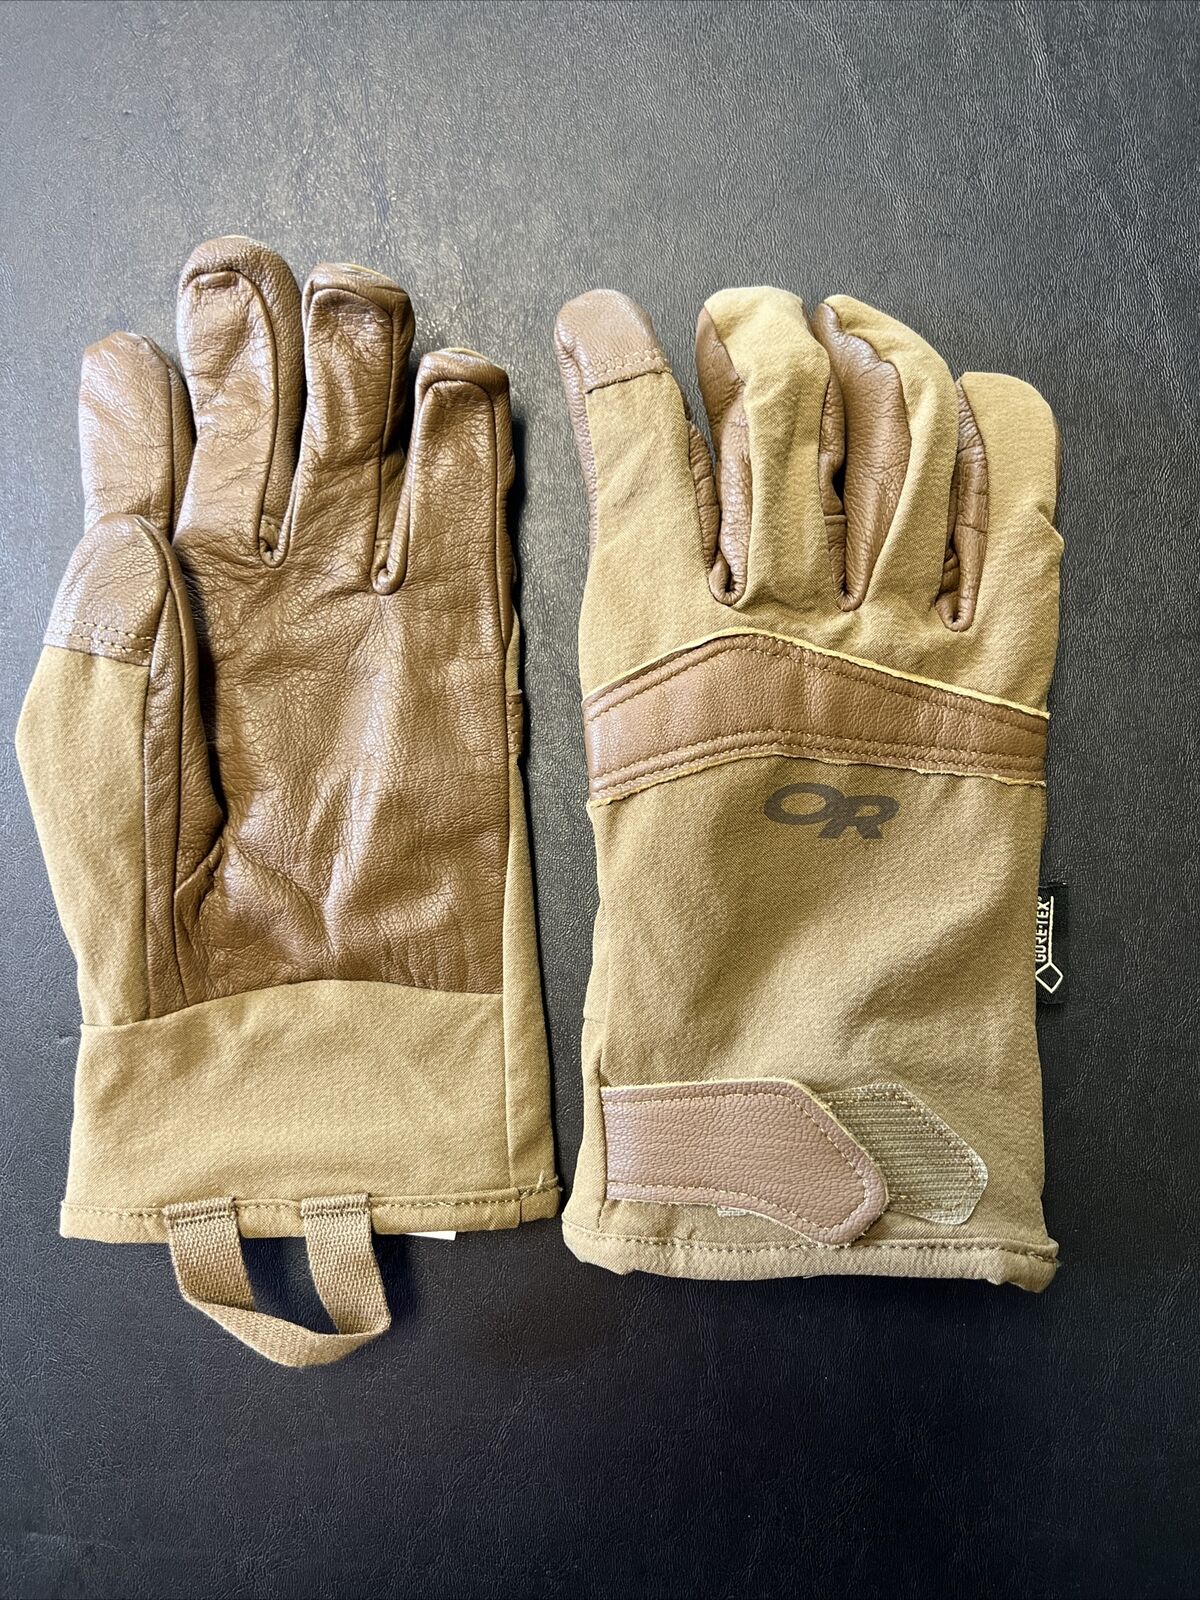 OUTDOOR RESEARCH OR COYOTE AGS CONVOY GLOVES GORE-TEX LARGE NWOT  K-106